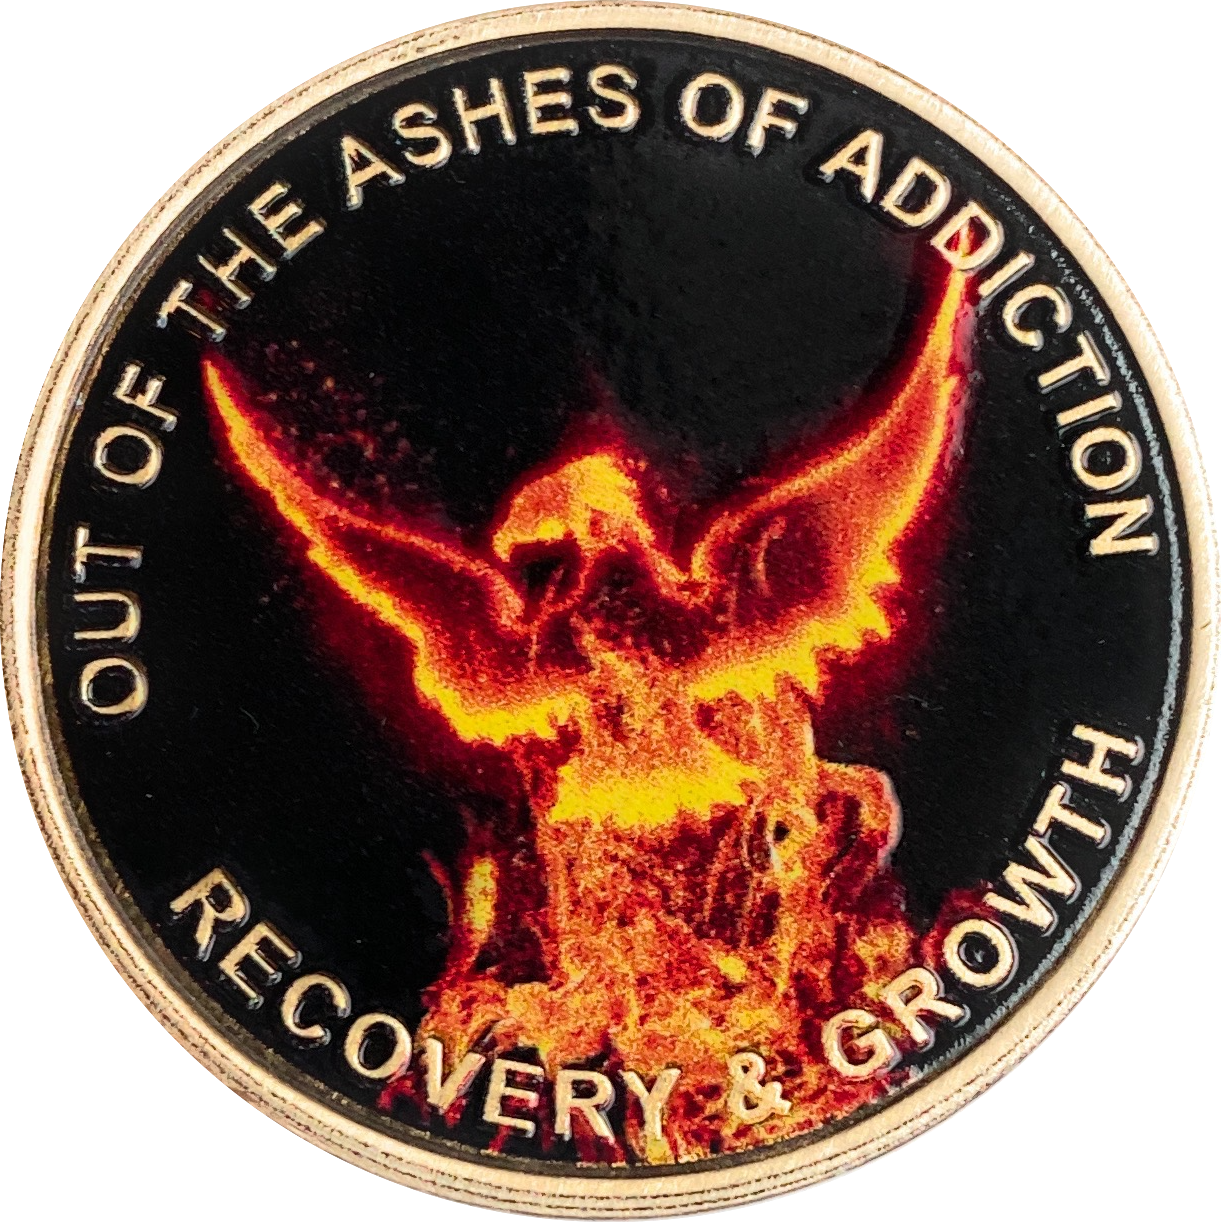 Out of The Ashes of Addiction Color Phoenix Rising from Flames